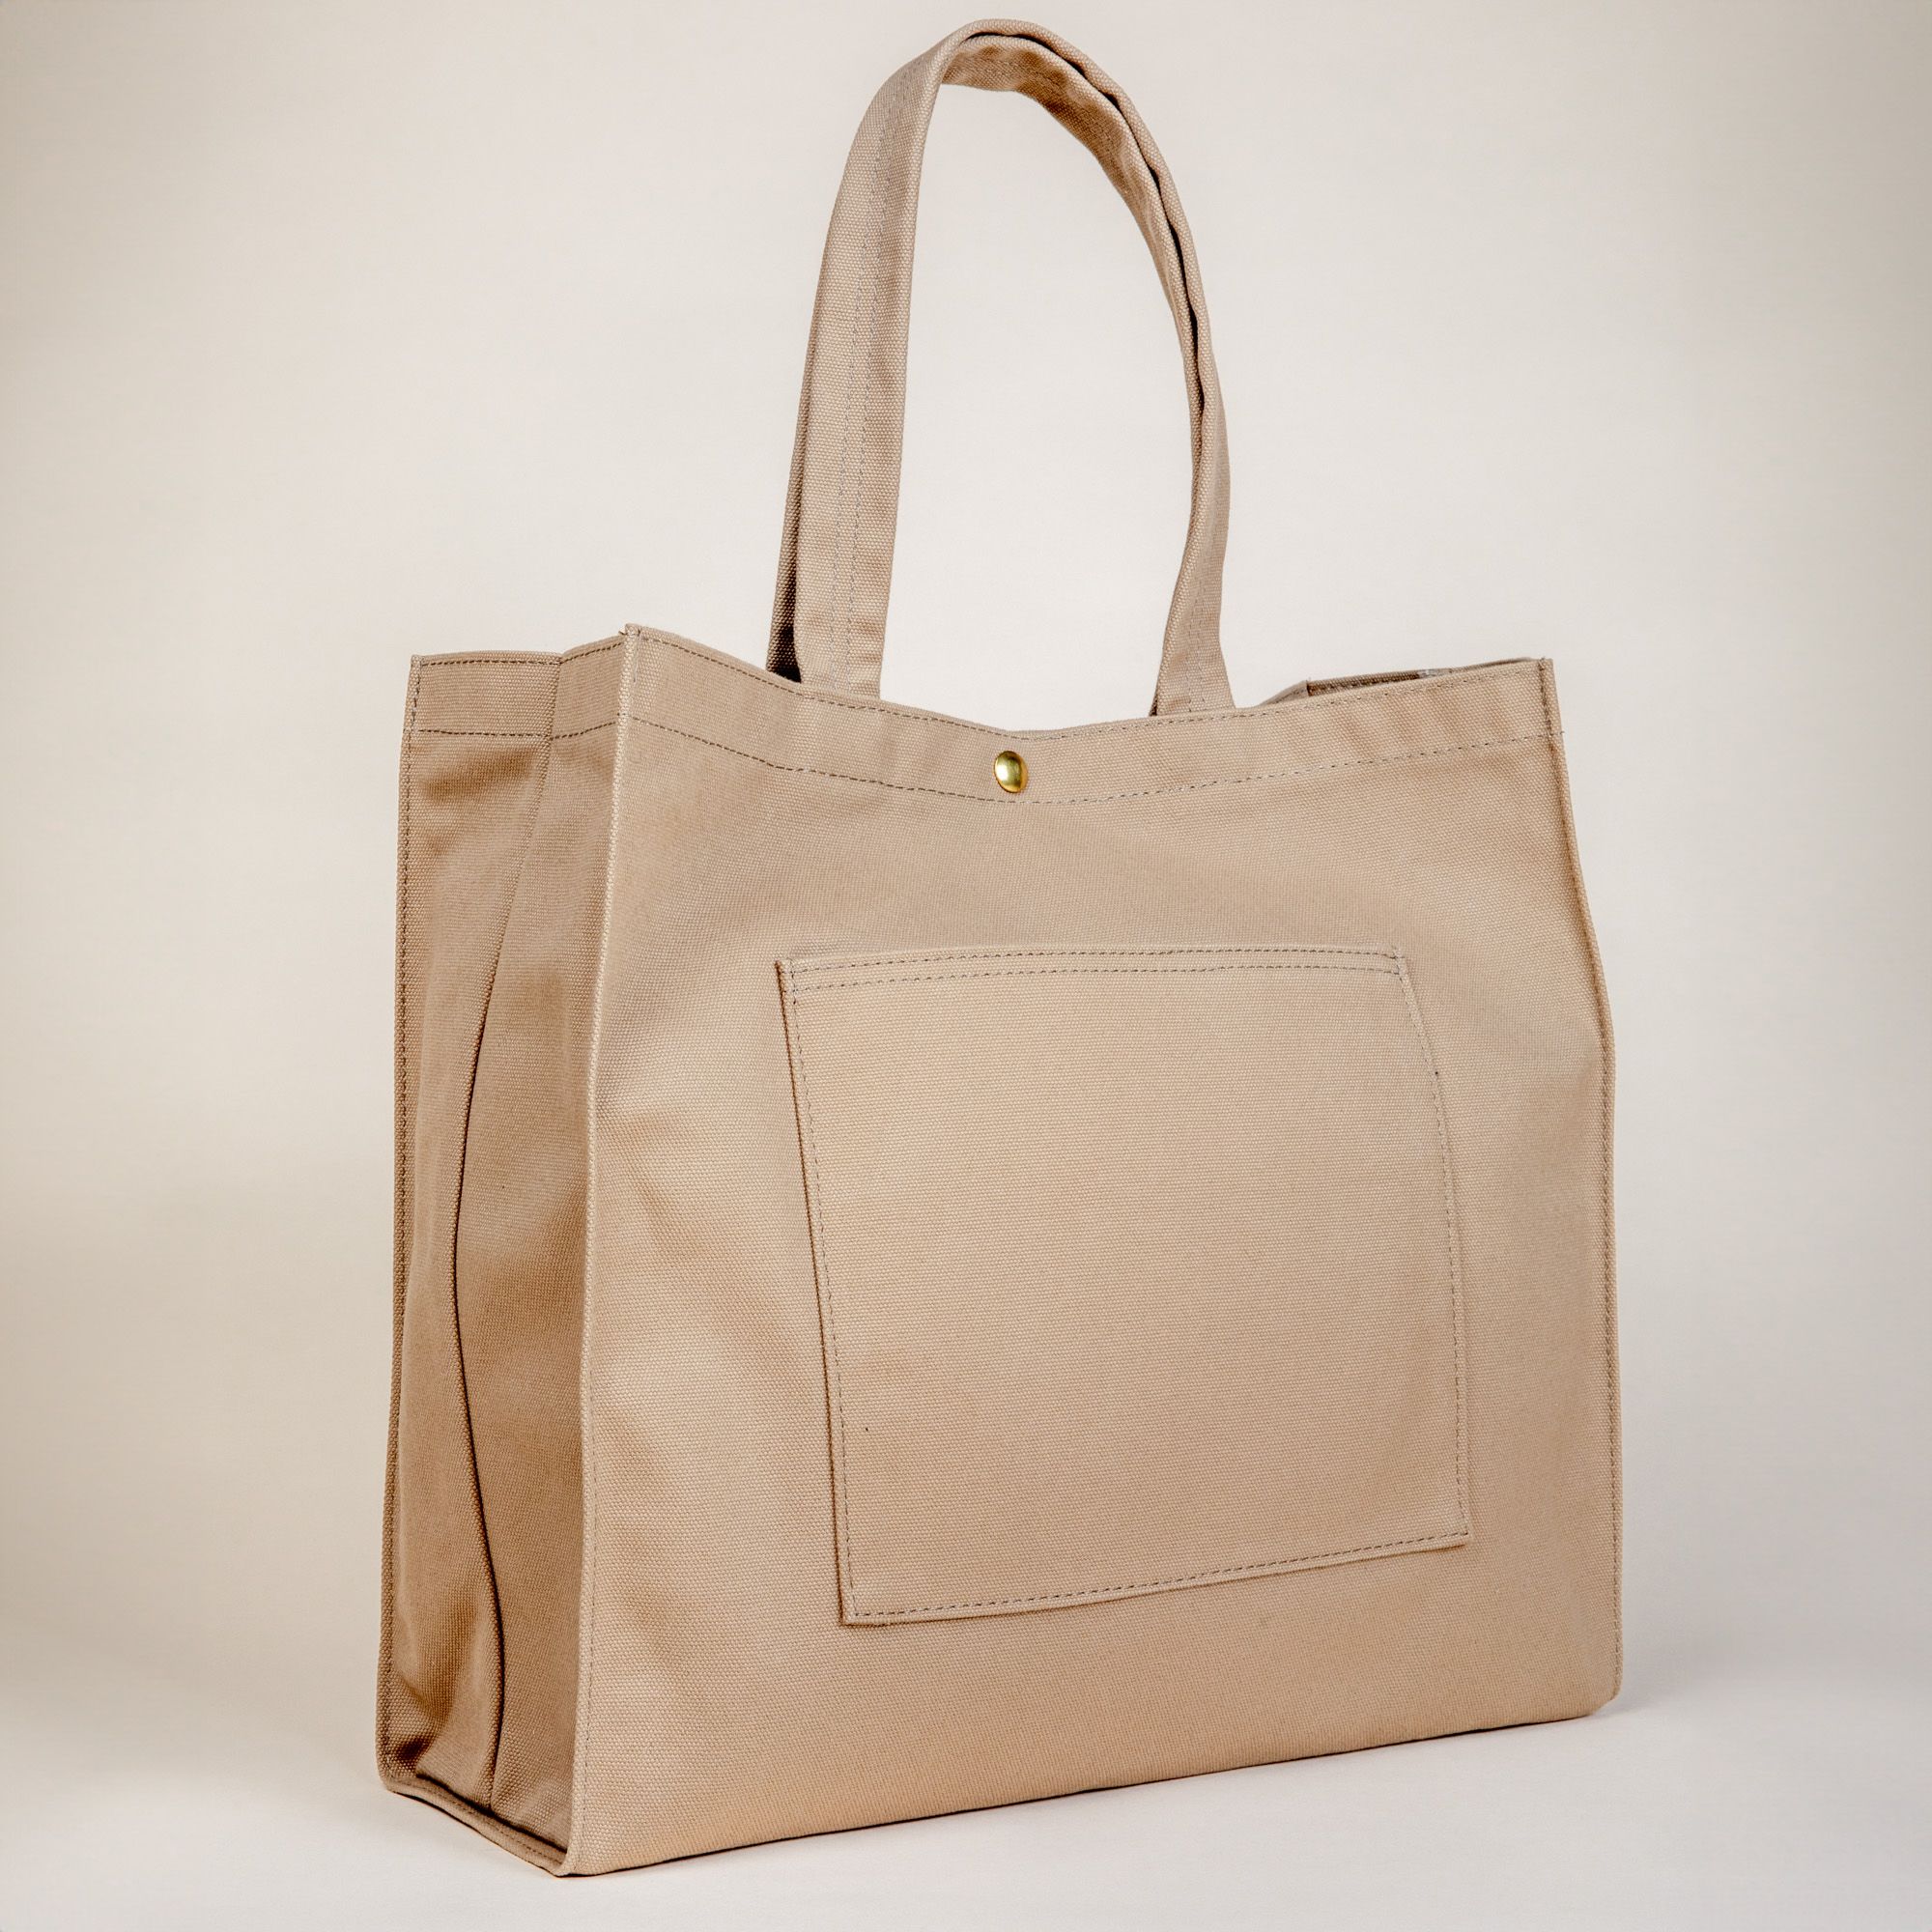 The back of a sturdy canvas tan tote bag with handles, flat pocket and a metal closure button at the top.